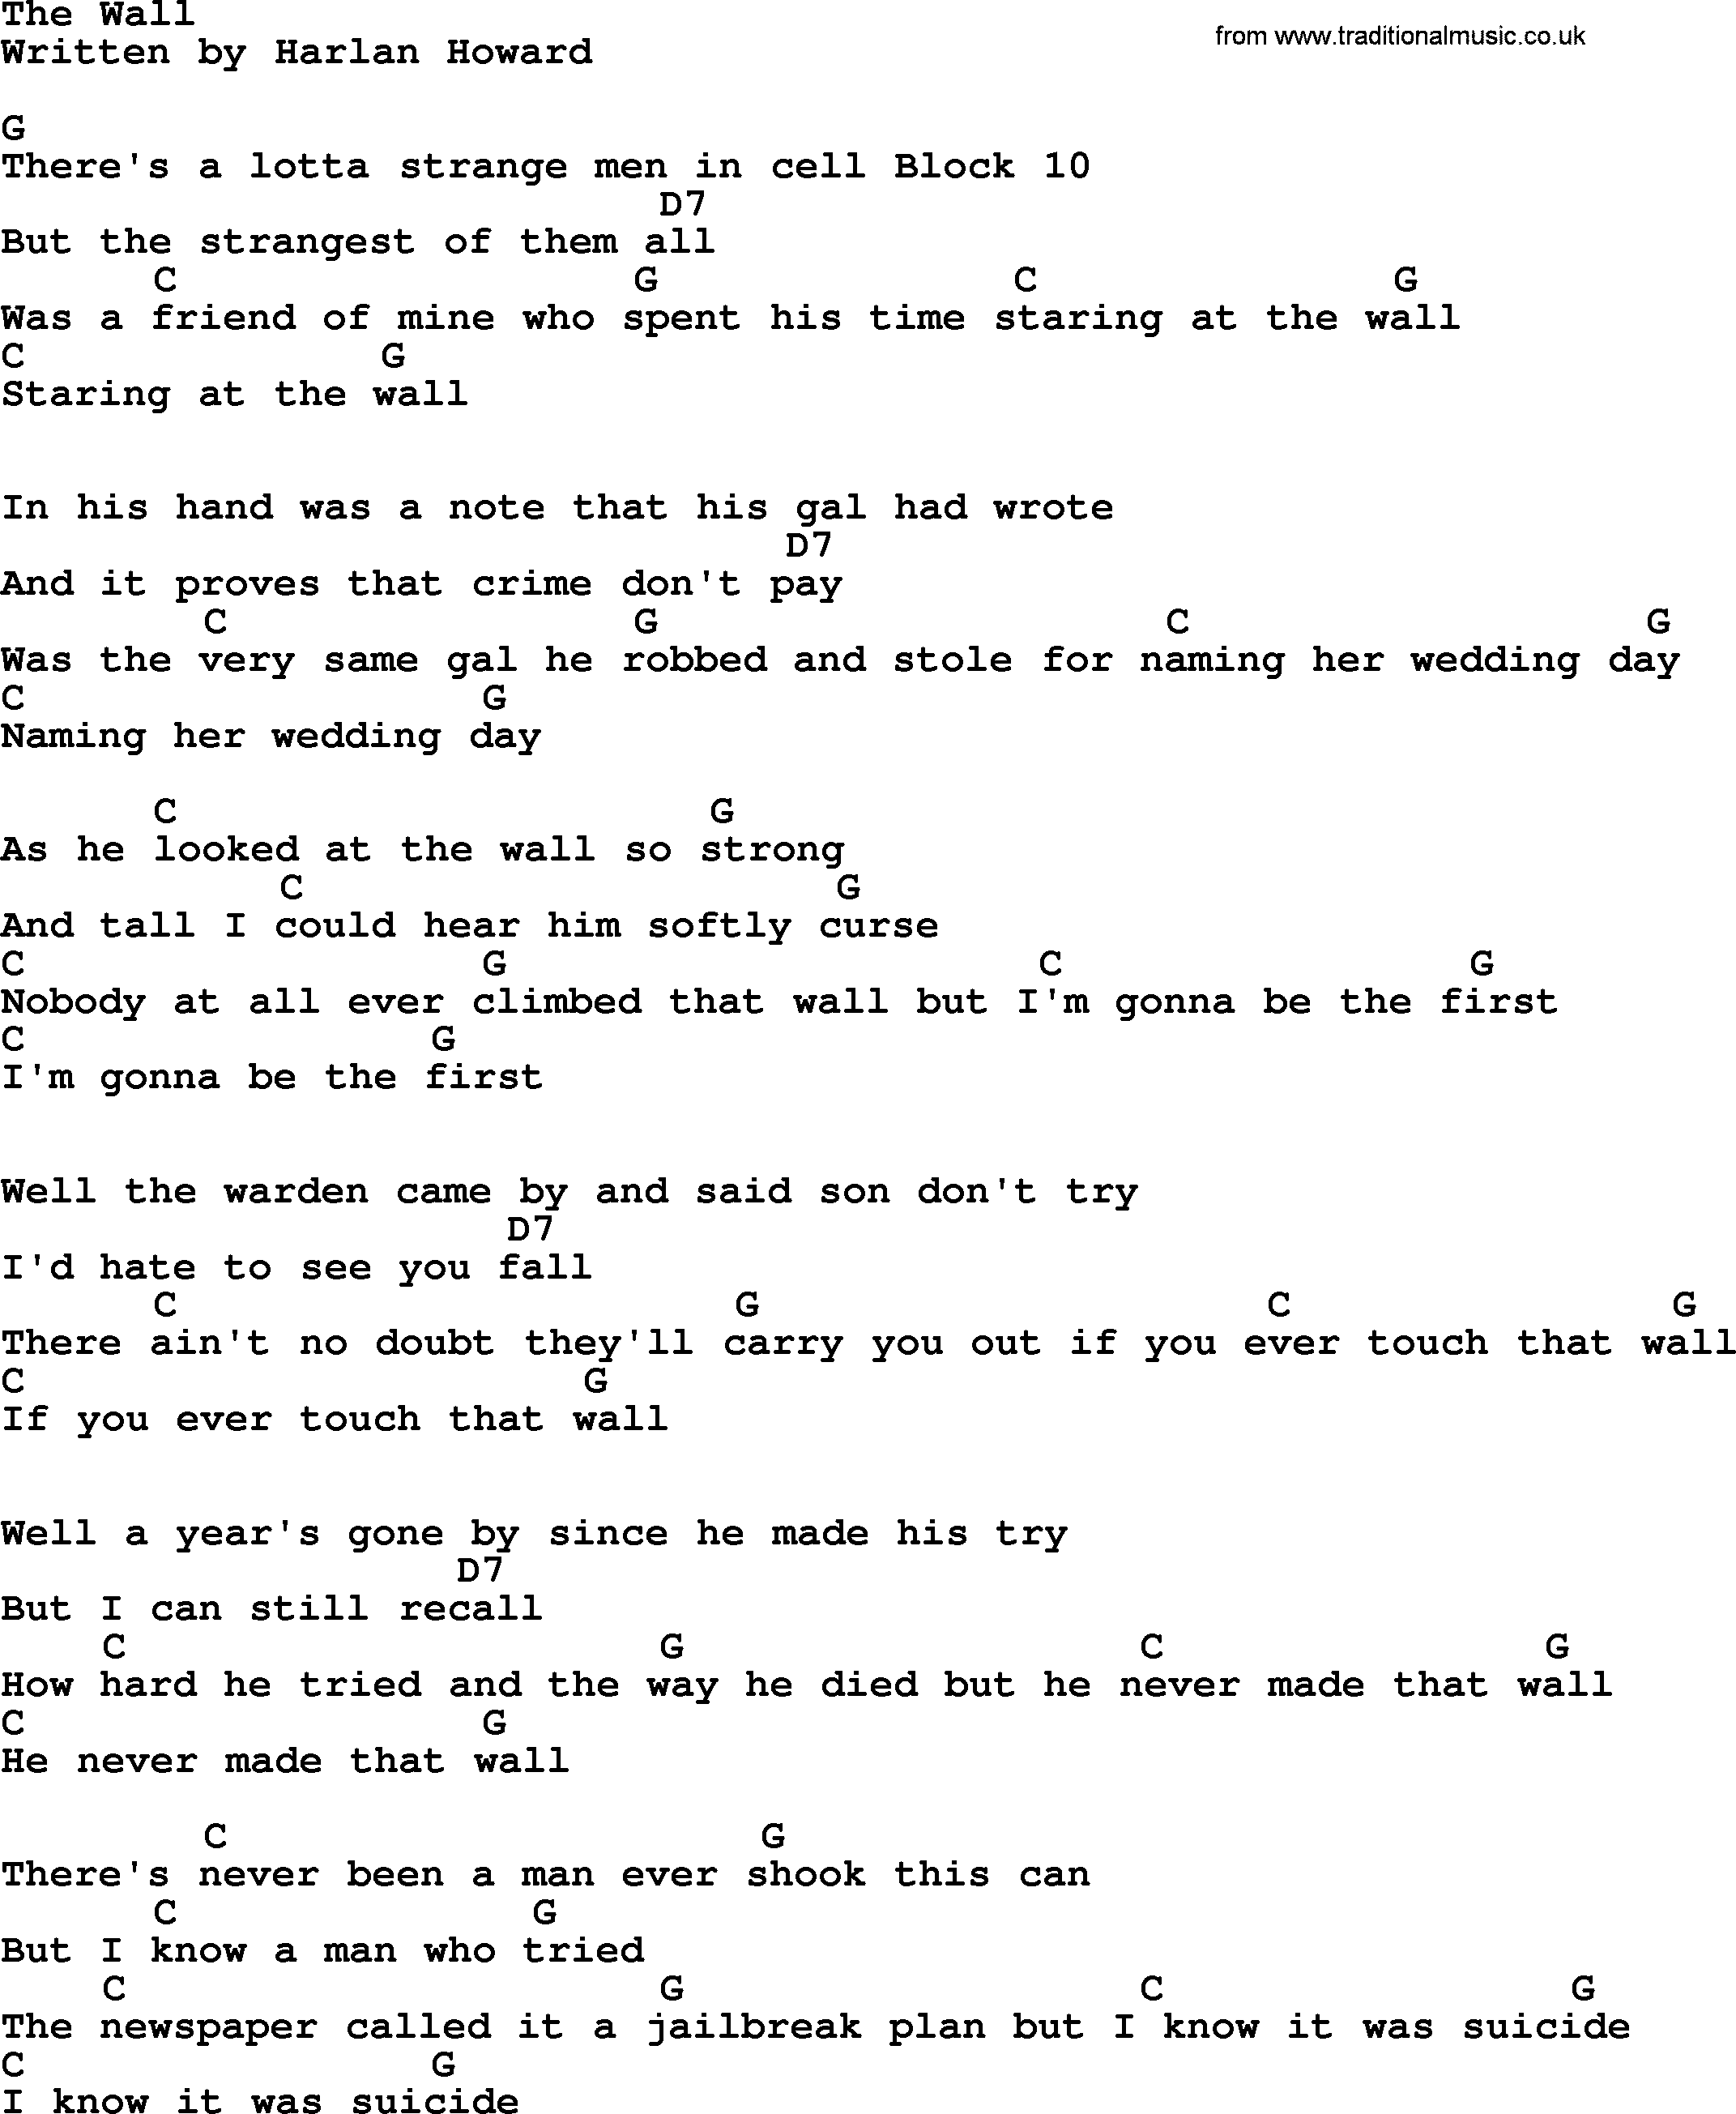 Johnny Cash song The Wall, lyrics and chords